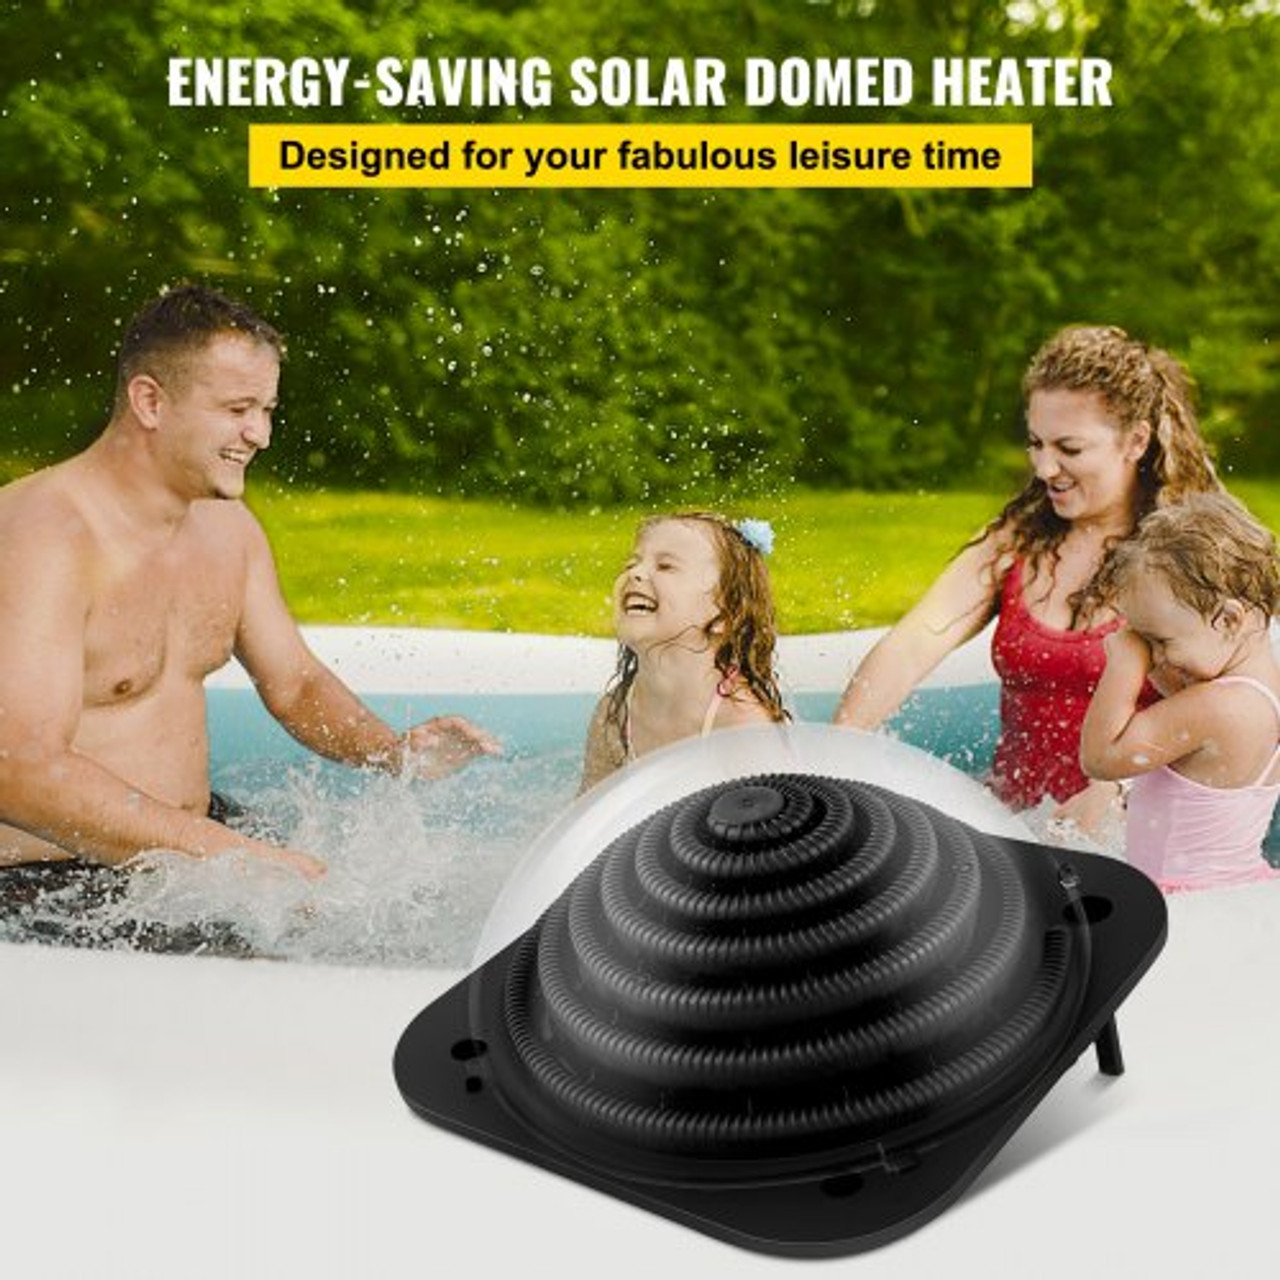 Solar Dome Heater, for Inground/Above Ground Swimming Pool Solar Dome, Outdoors Pool Dome, Single Unit Solar Water Heater, Heats Pools up to 2641 Gallons Solar Powered Dome Black Heater Contour